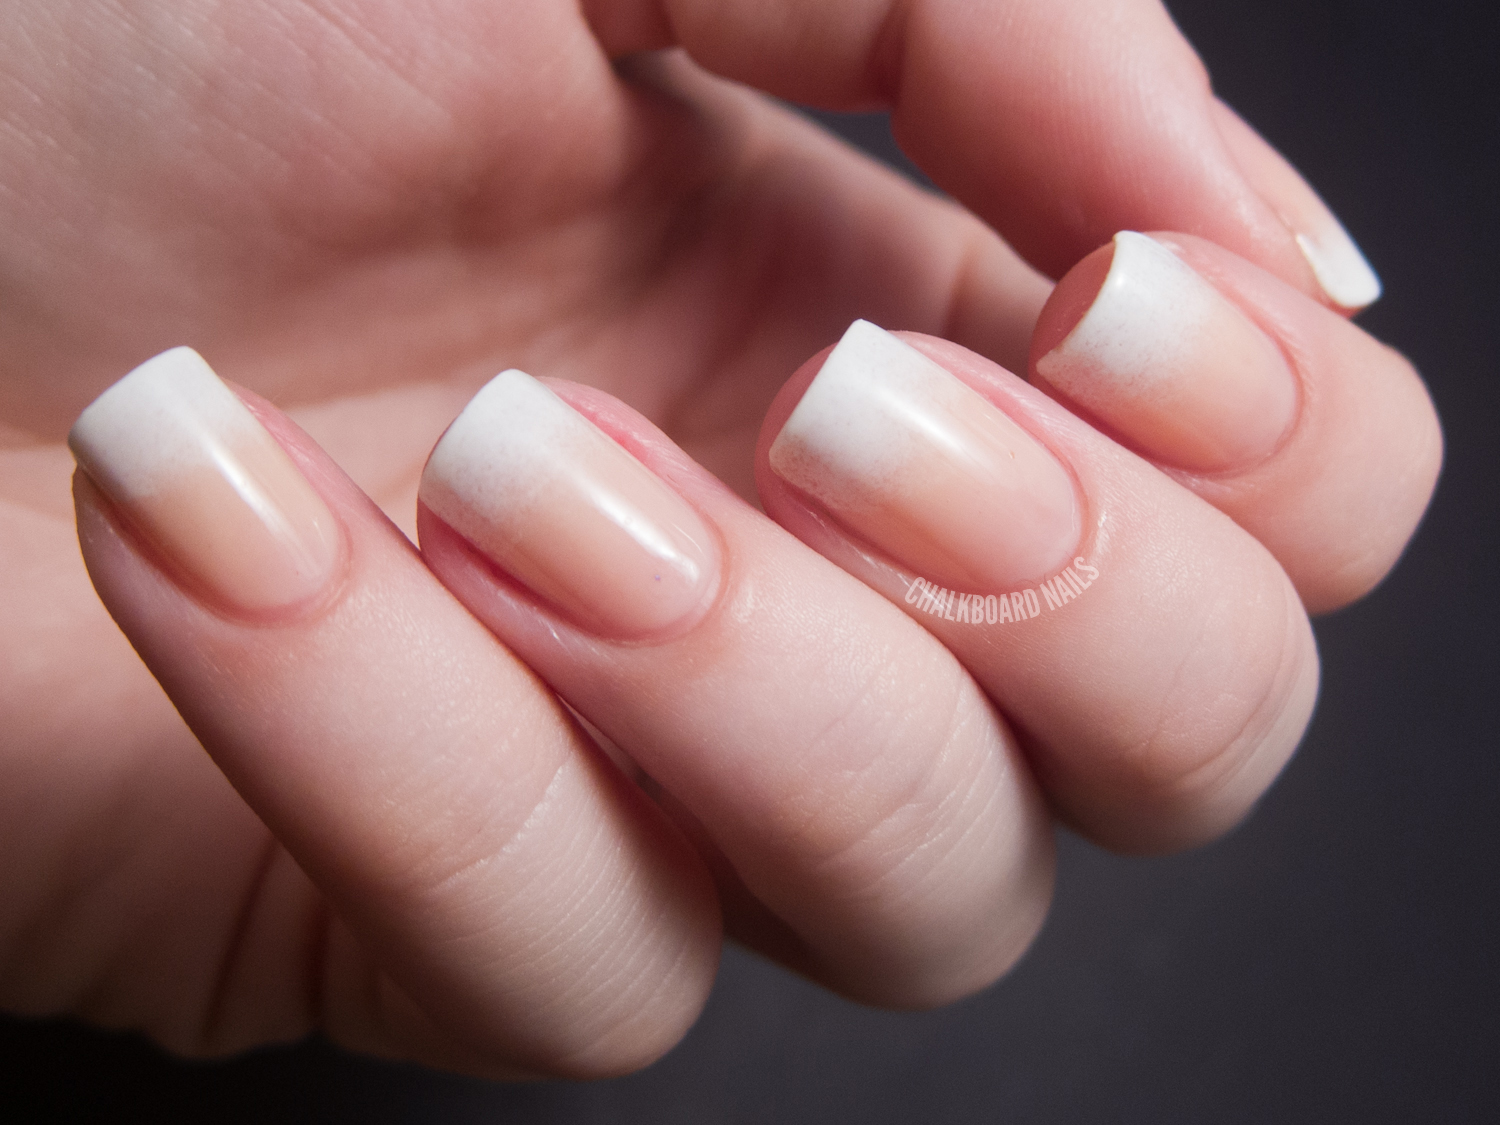 1. "French Manicure Nail Art Ideas: The Best Designs for a Classic Look" - wide 5